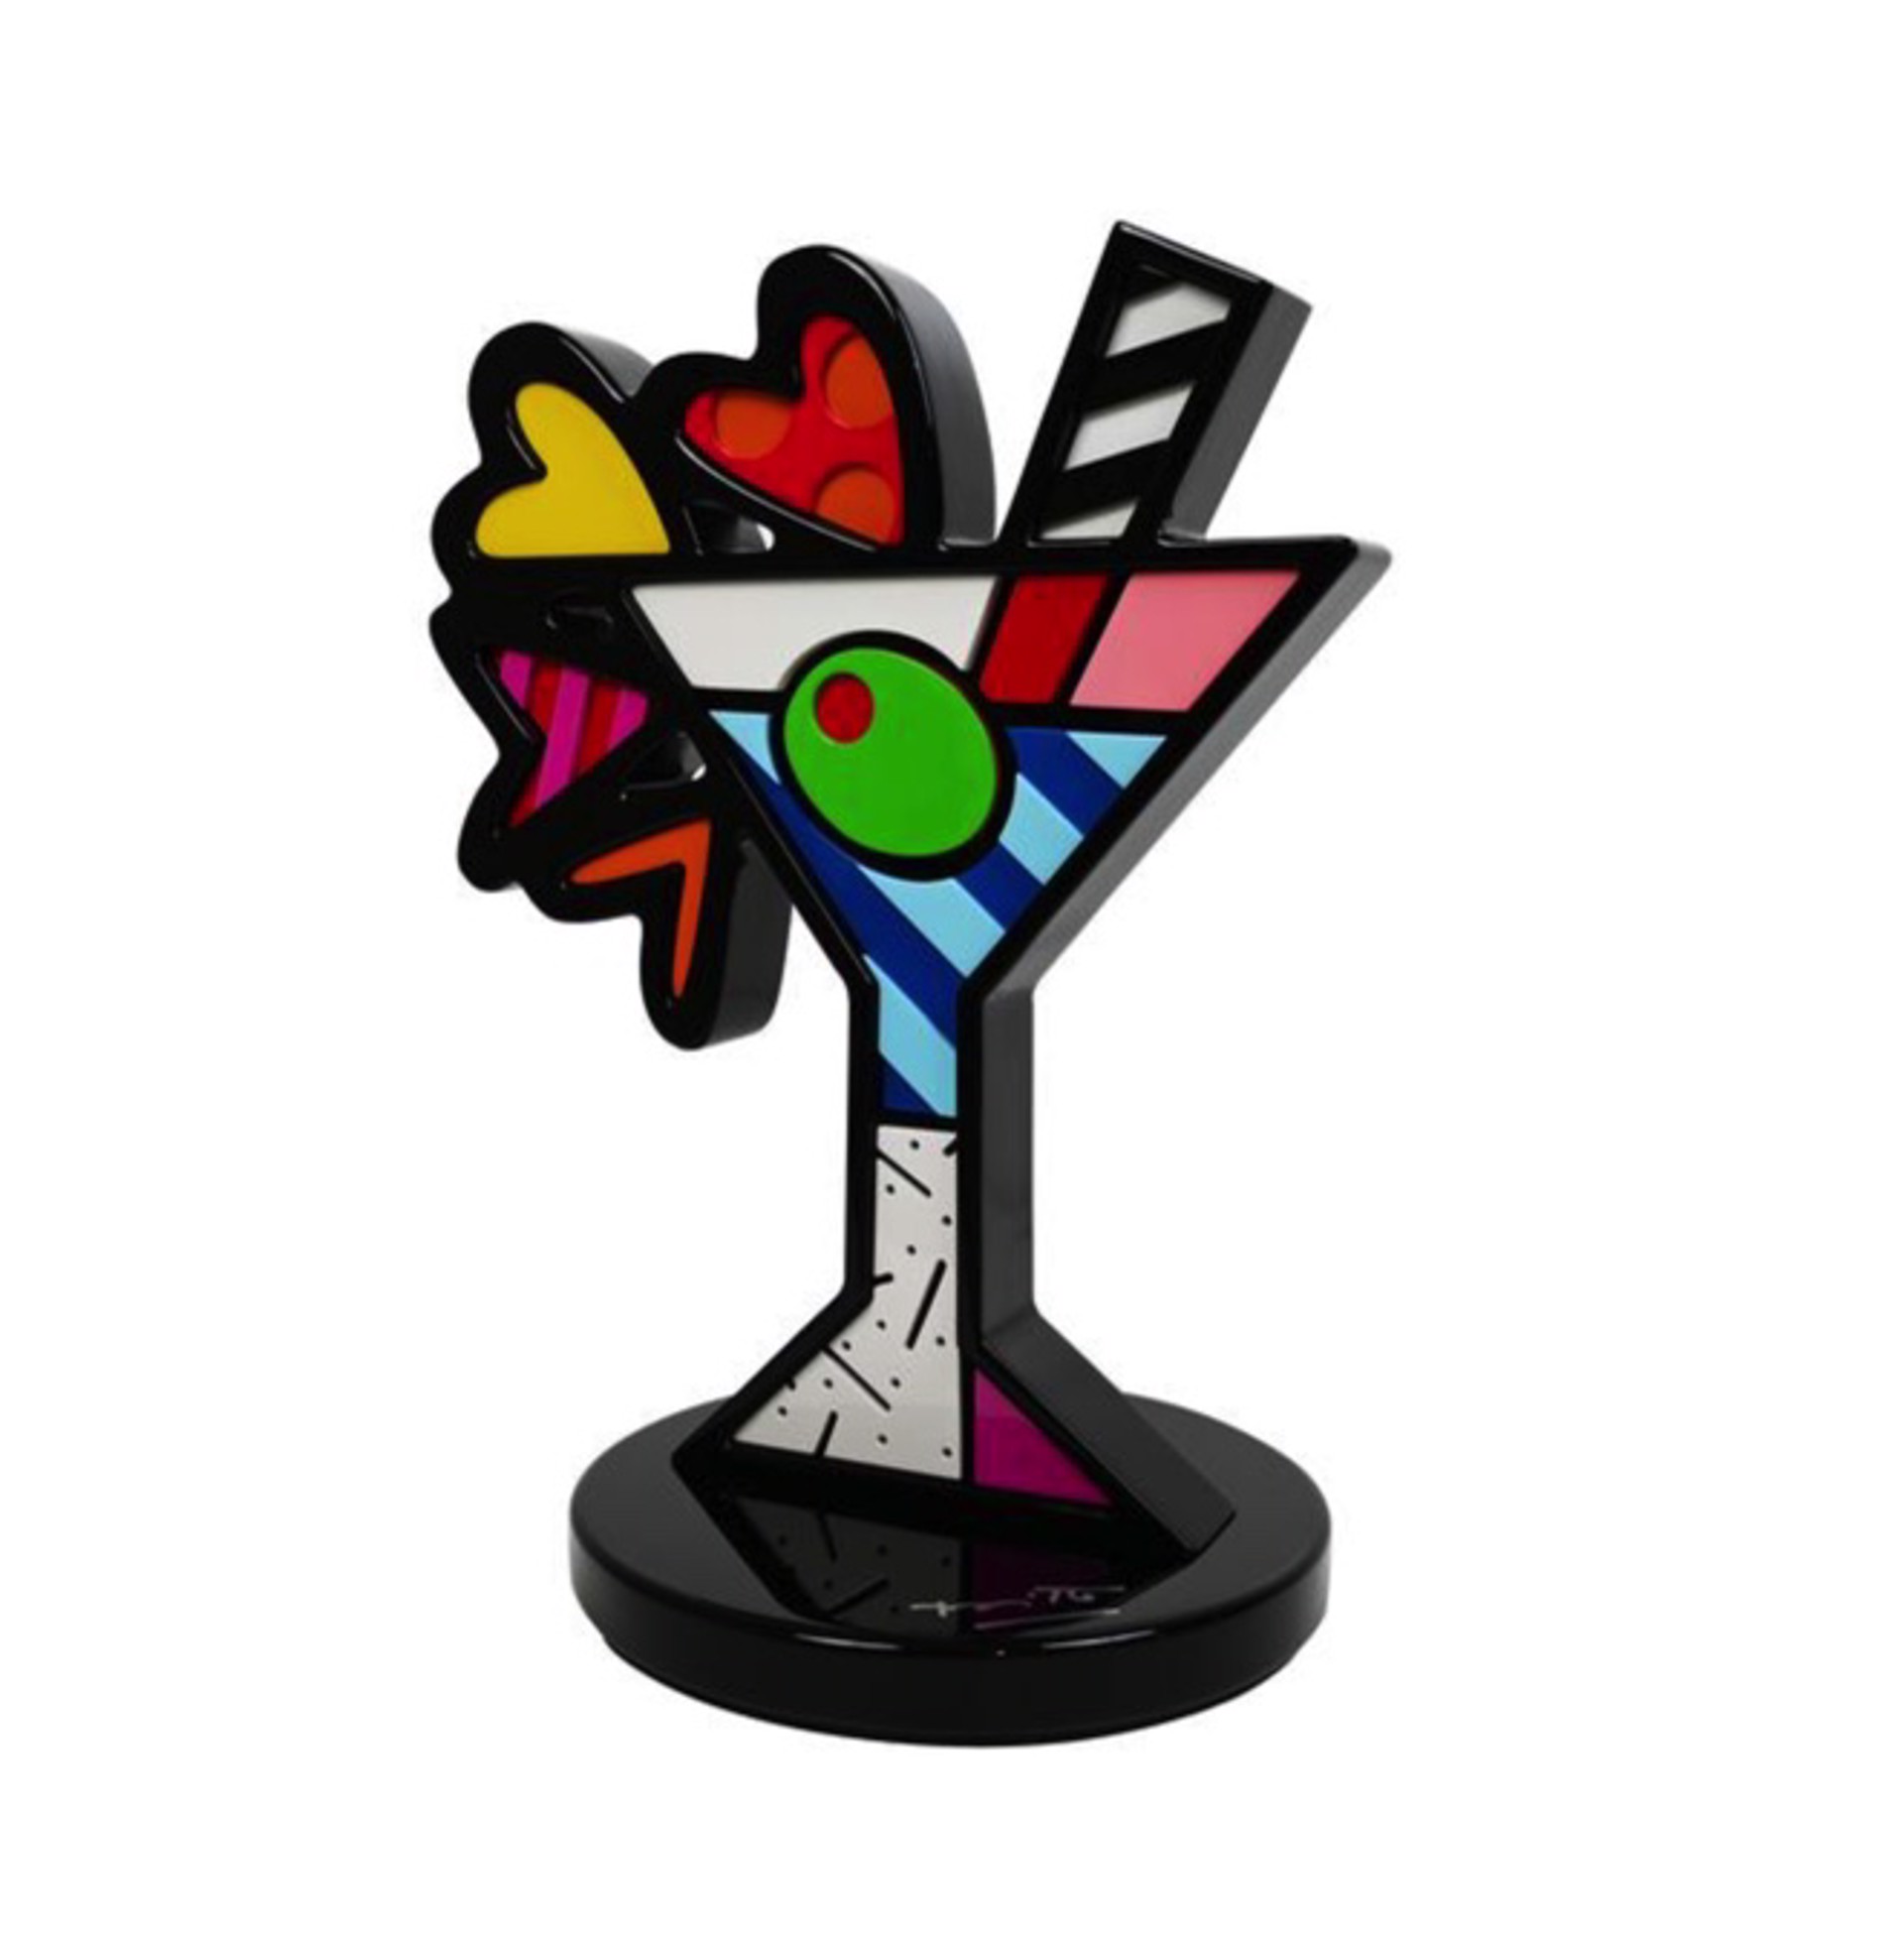 Drink With Me by Romero Britto